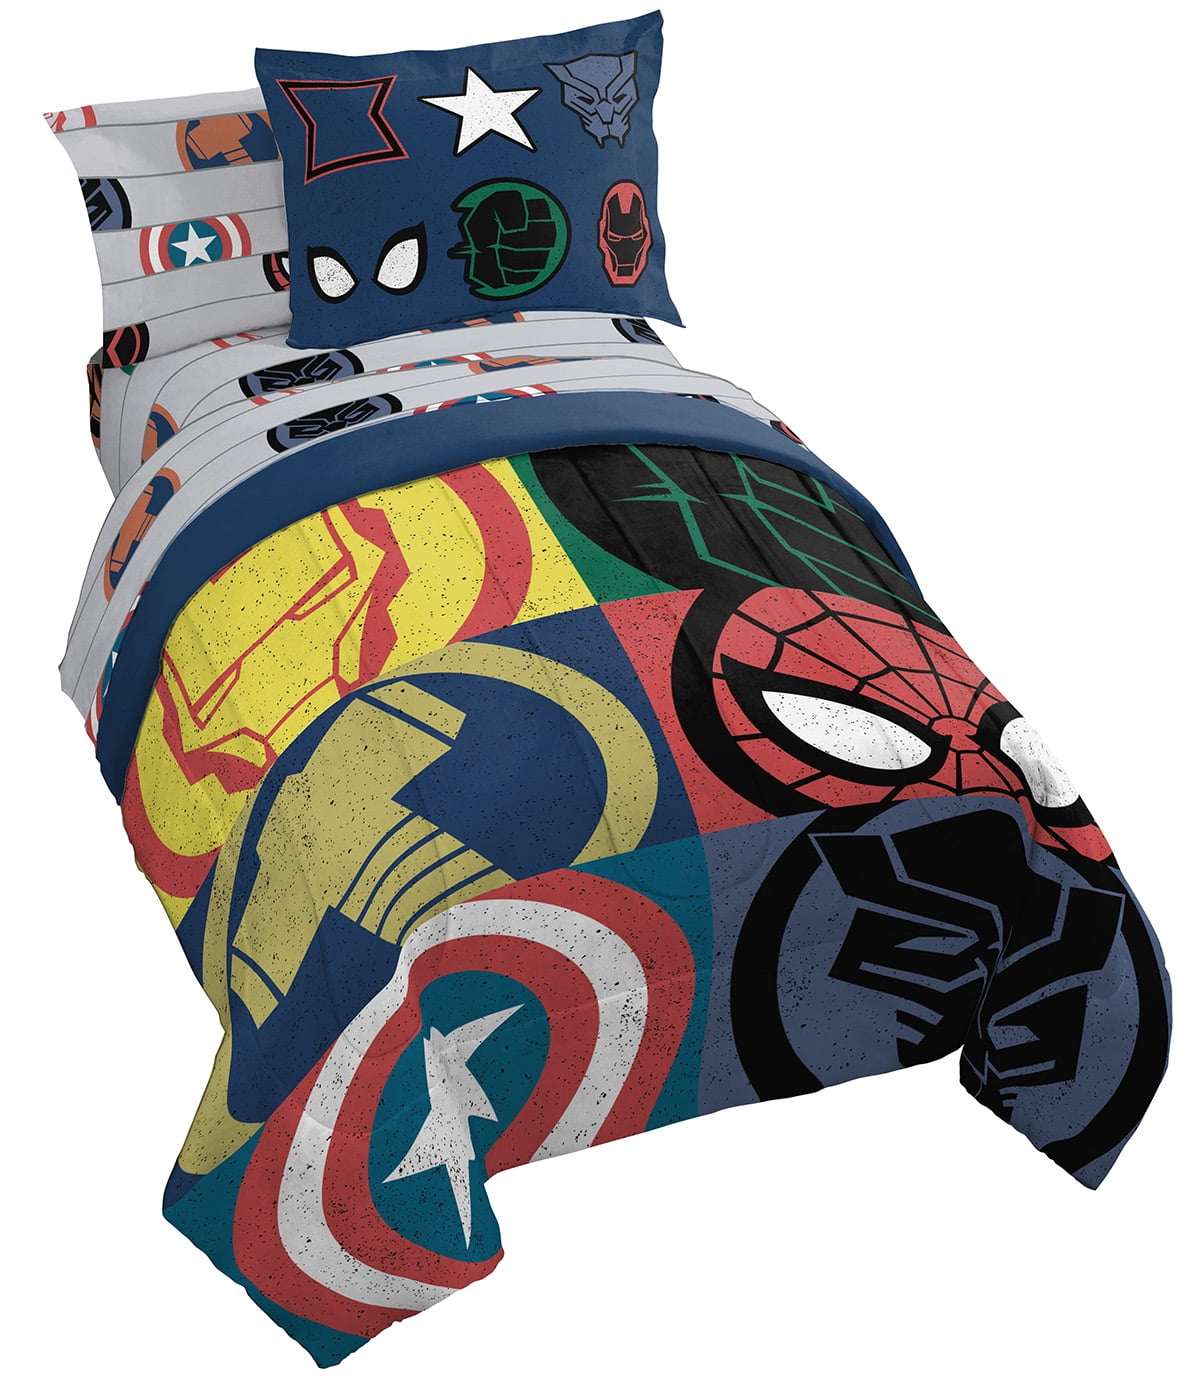 Official Marvel Product Fade Resistant Polyester Microfiber Fill Hulk and Thor Super Soft Kids Reversible Bedding Features Iron Man Captain America Marvel Avengers Heroic Age Twin Comforter 